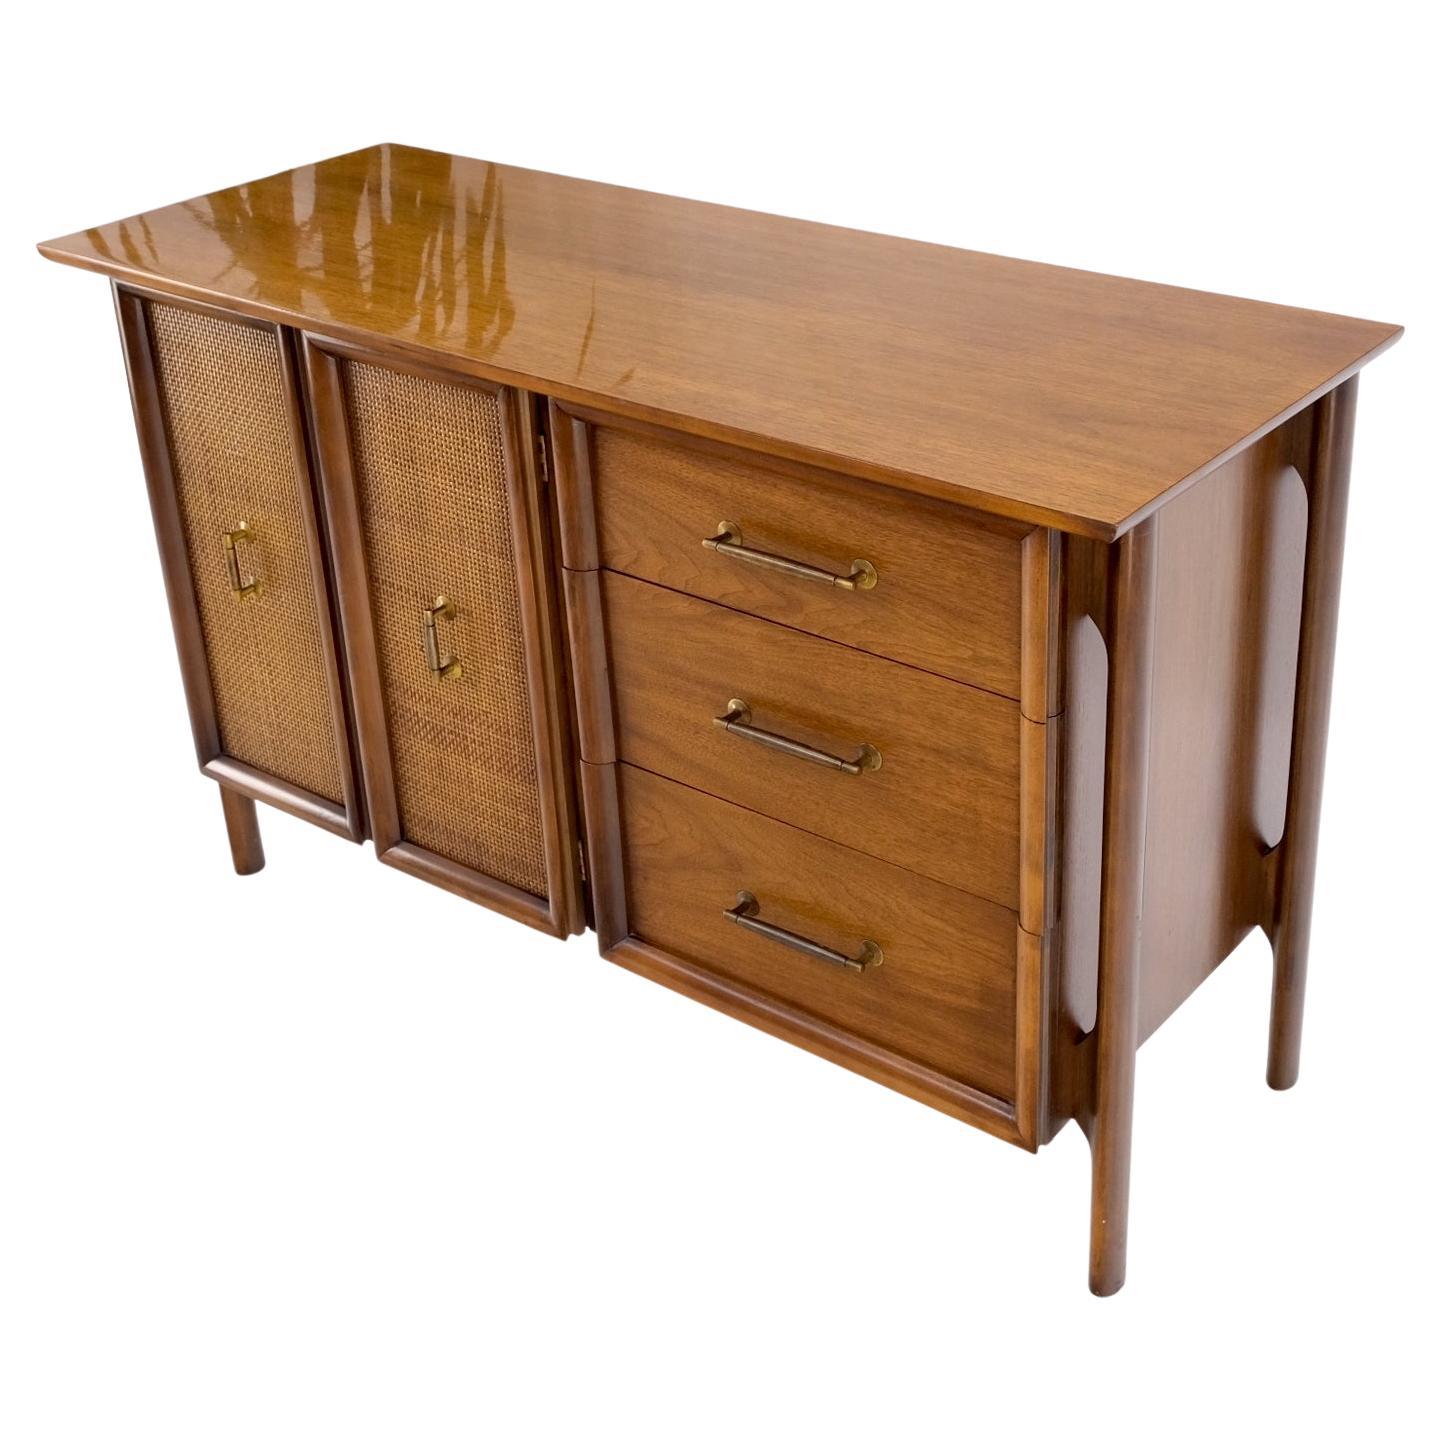 Exposed Sculptural Legs Walnut Three Drawers Two Doors Credenza Server Sideboard For Sale